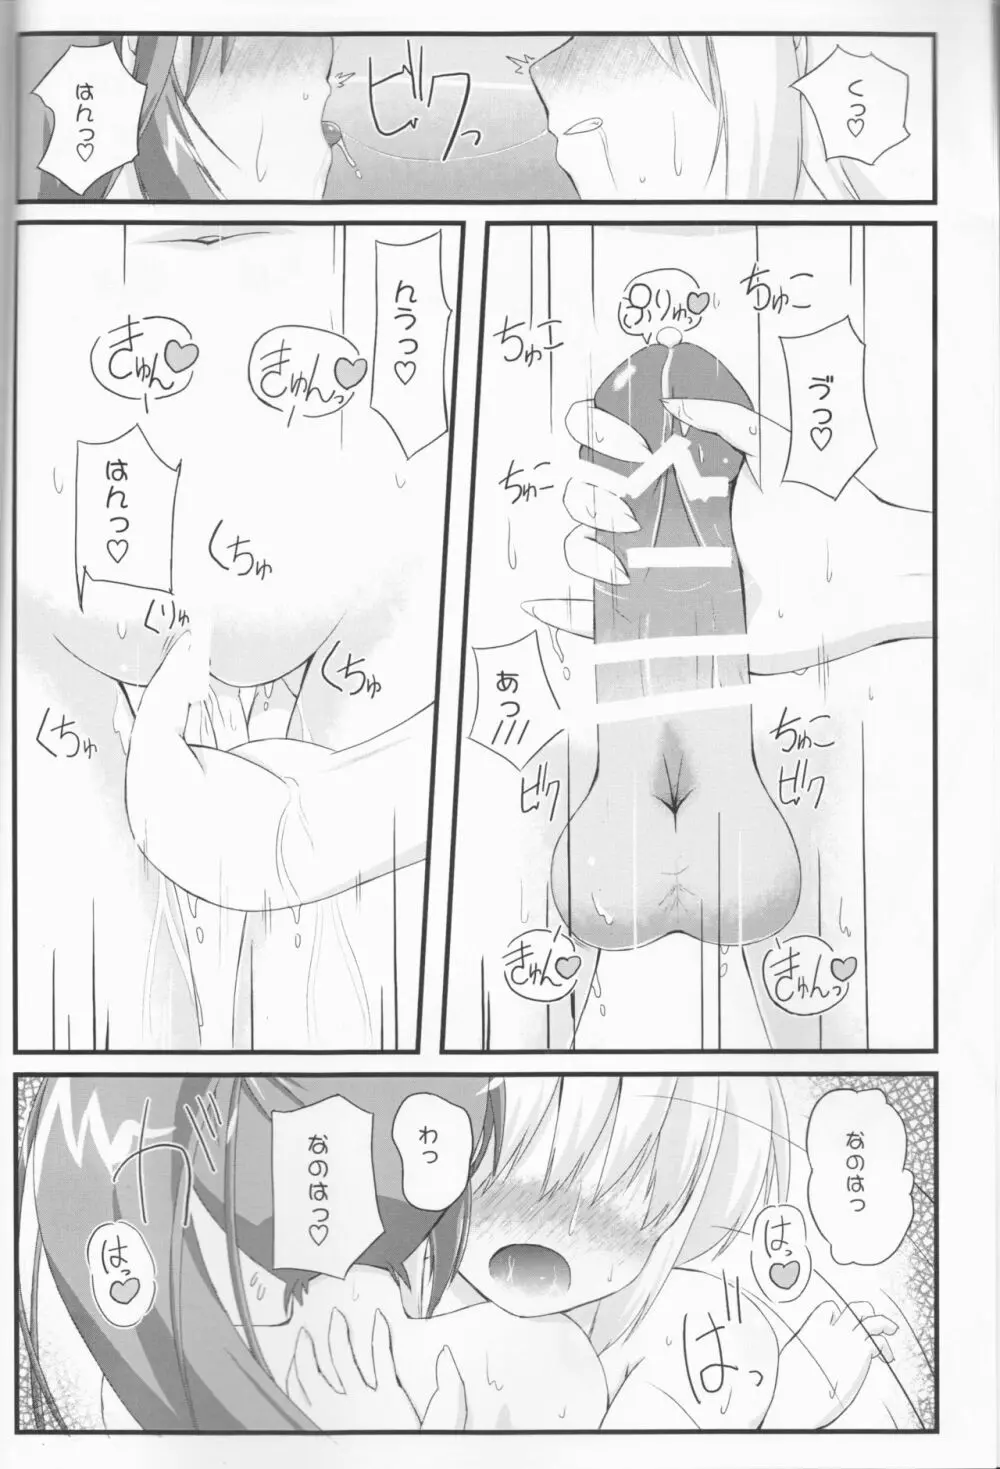 Pure Heart 11th Episode ～Dense Time～ Page.3